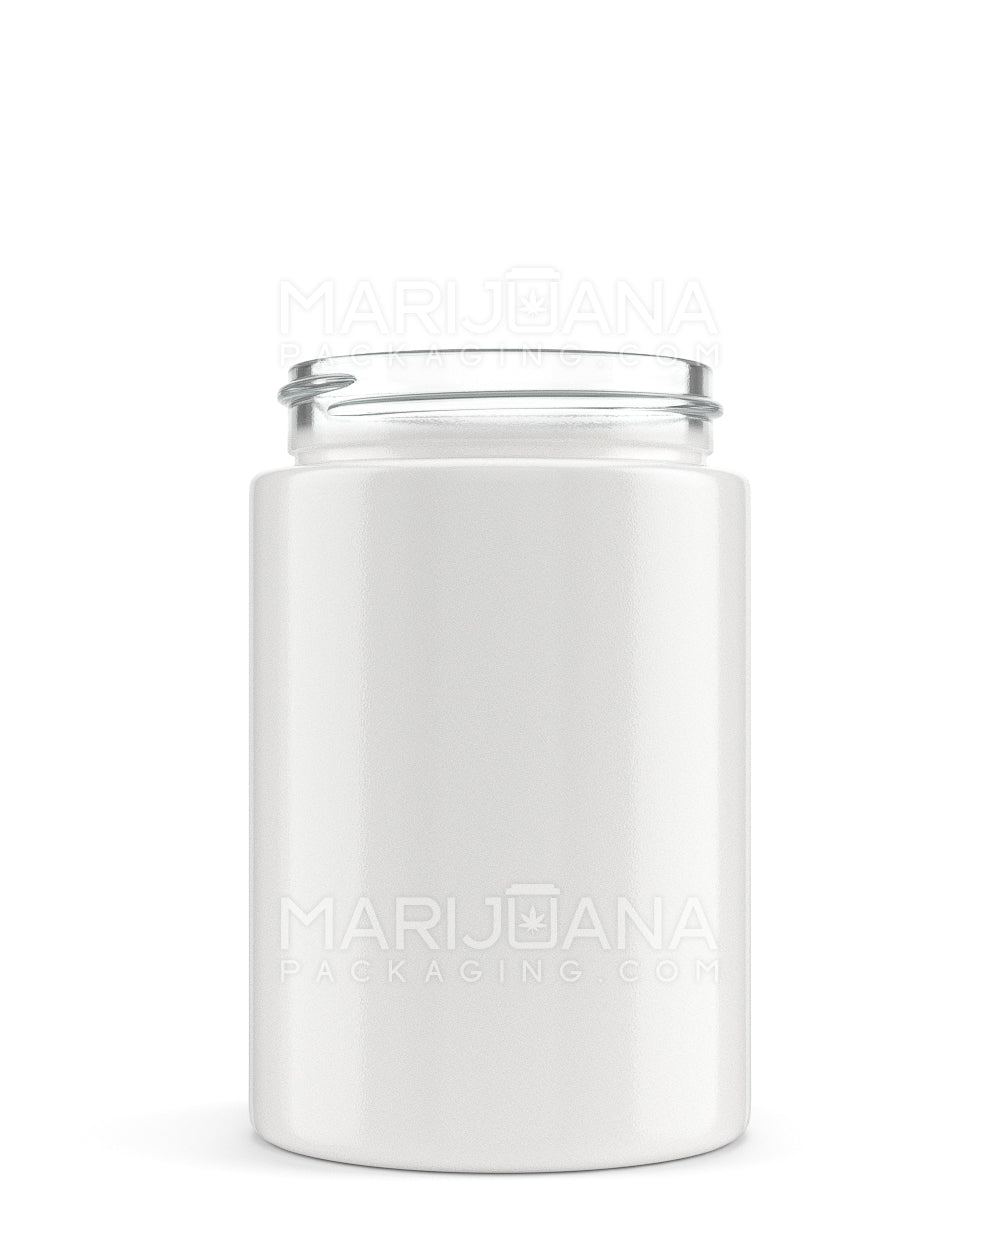 Straight Sided Glossy White Glass Jars | 50mm - 5oz - 100 Count - 1